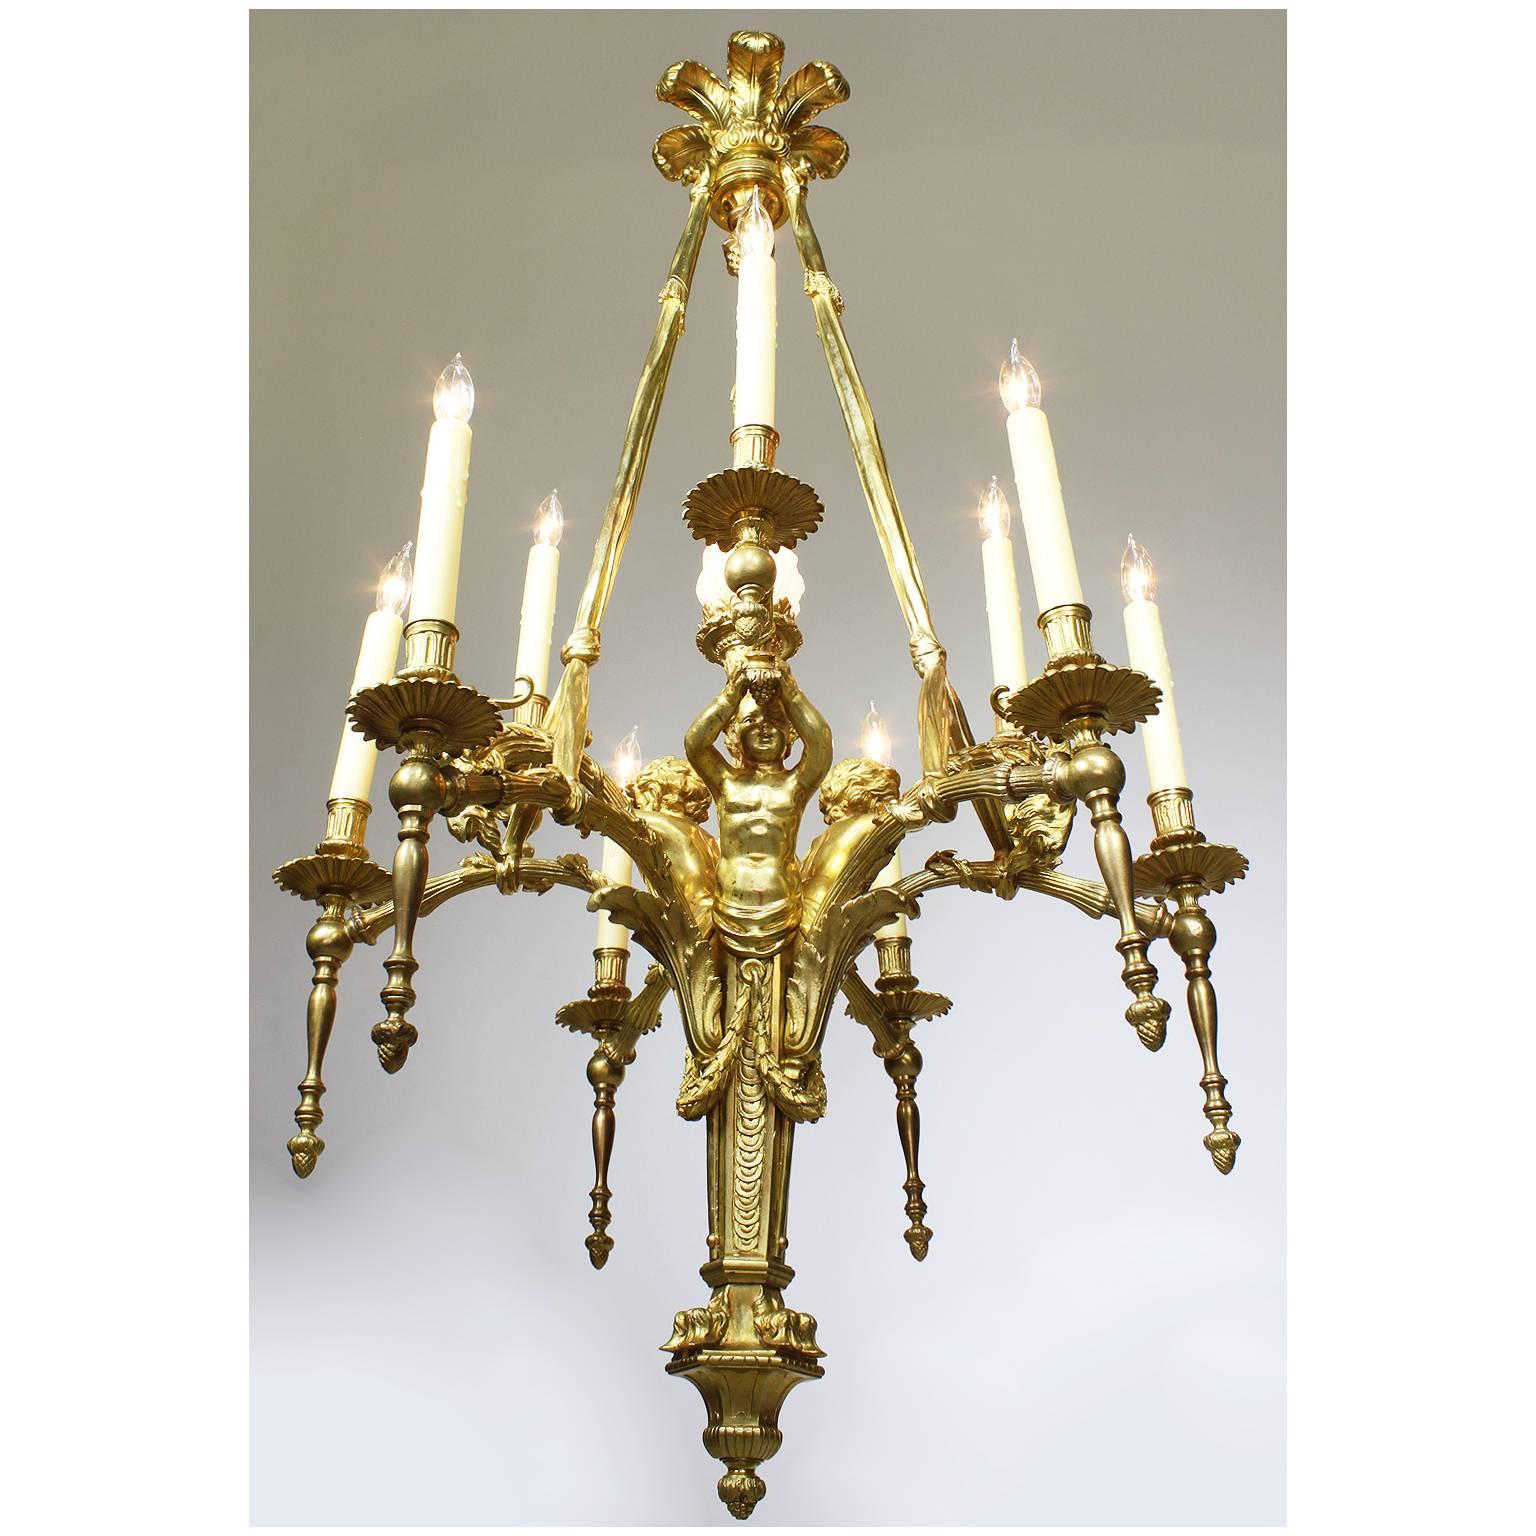 A very fine French 19th-20th century Belle Époque ten-light chandelier, Paris, circa 1900. The Royal peacock feather-cast corona centered with pine-cone finial drop, supporting three suspending tasseled swags, the nine candelabrum alternating with